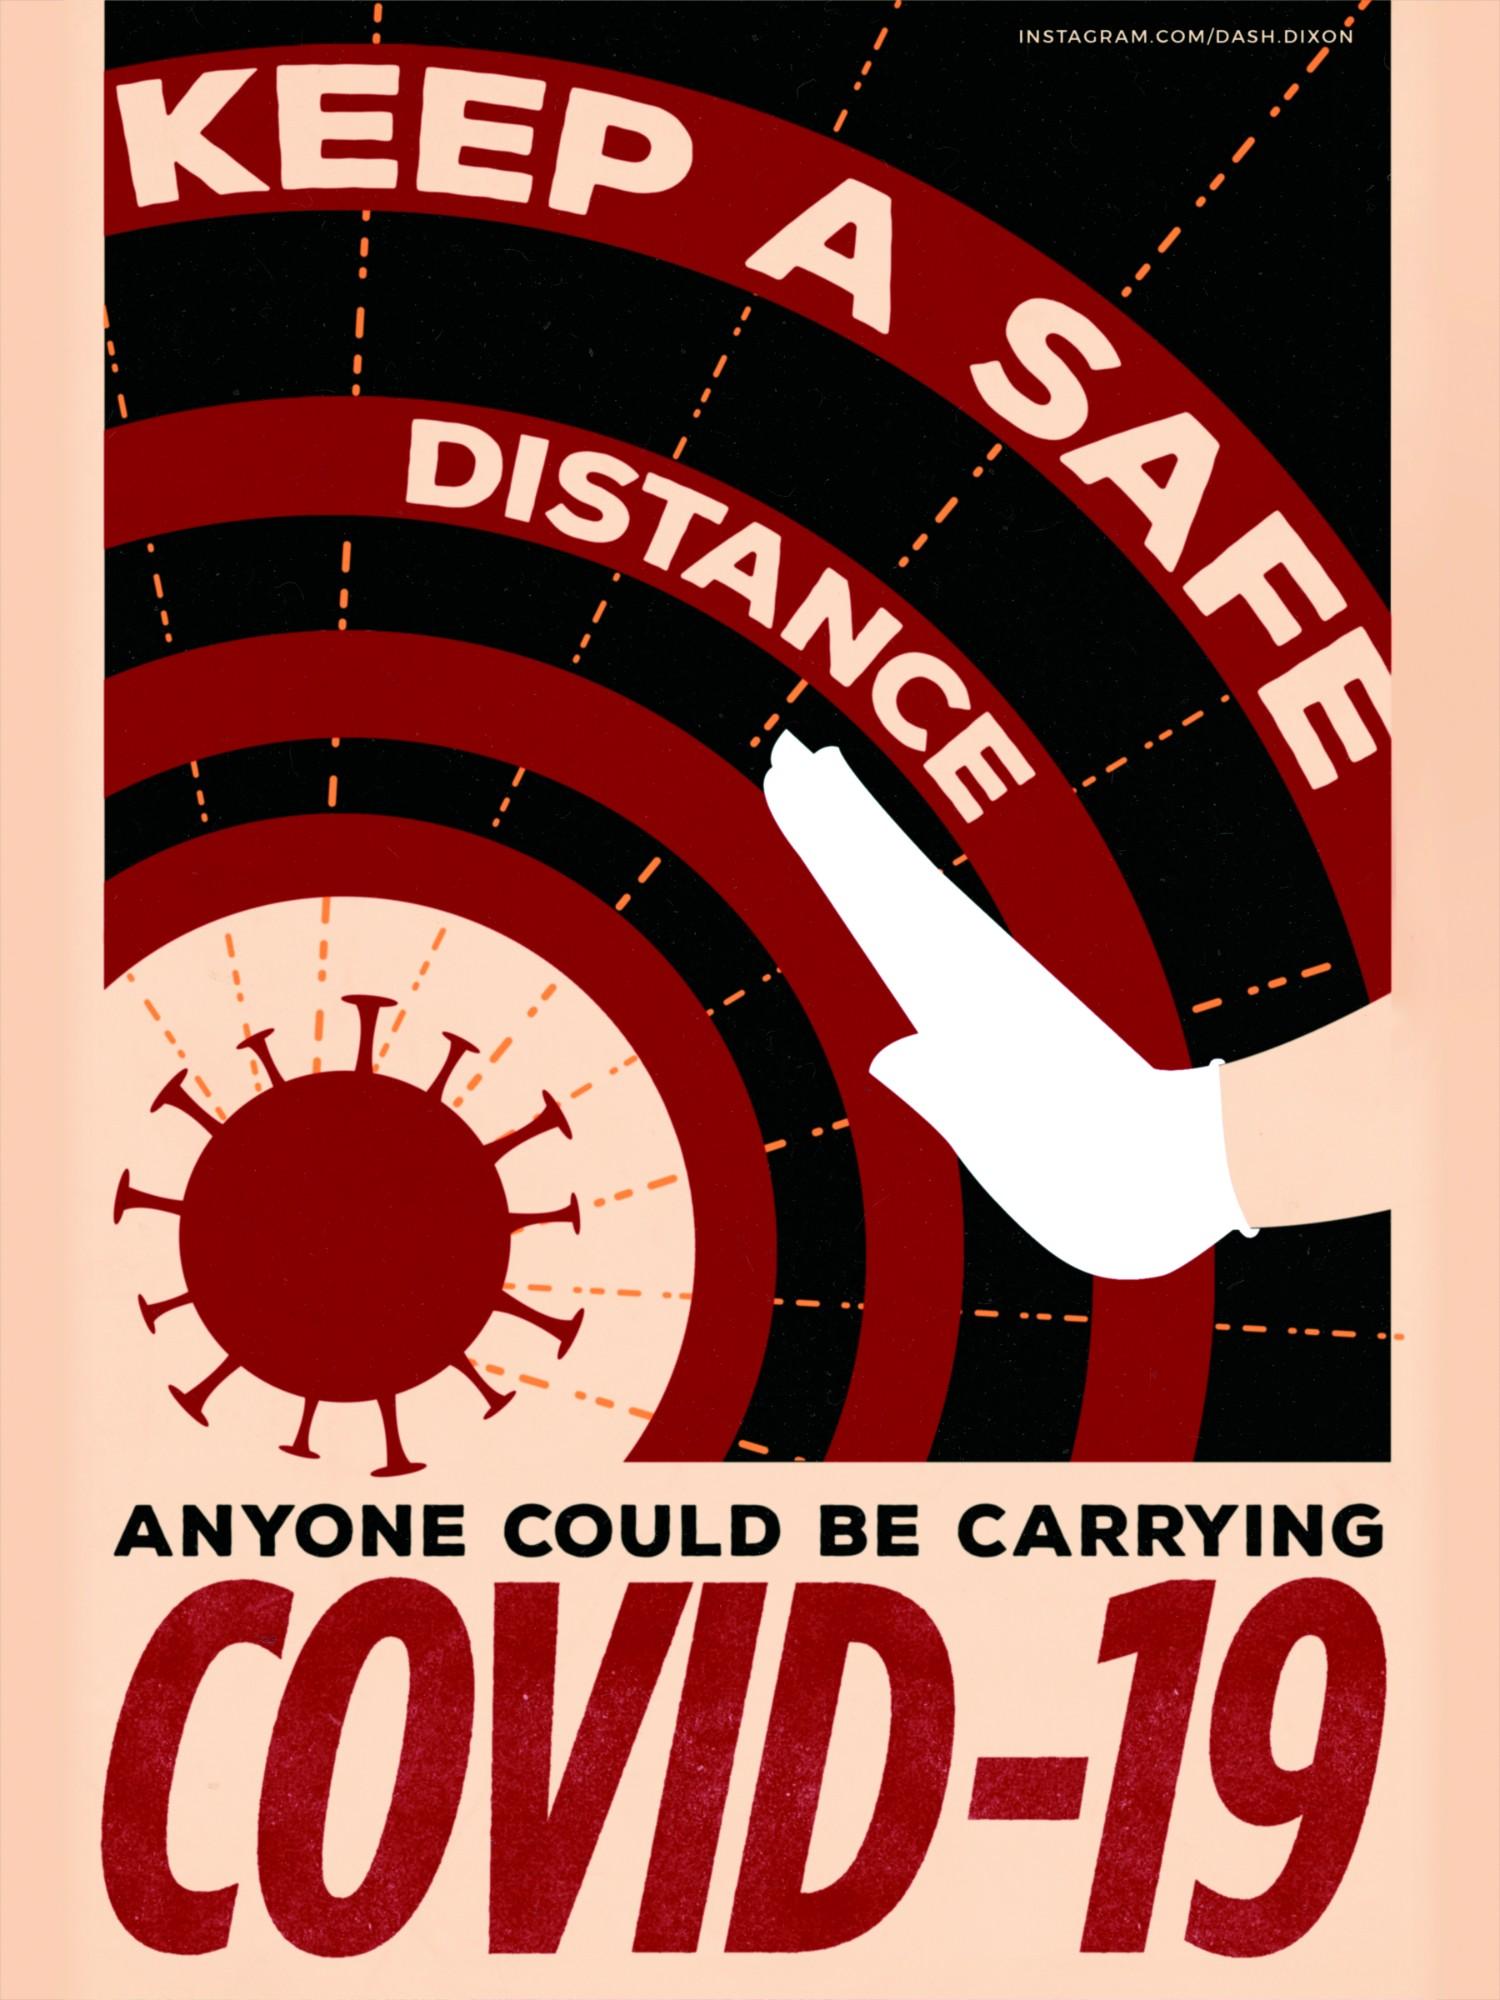 covid-19 propaganda poster with the text "keep a safe distance, anyone could be carrying covid-19" and the image of a hand pushing away a coronavirus particle